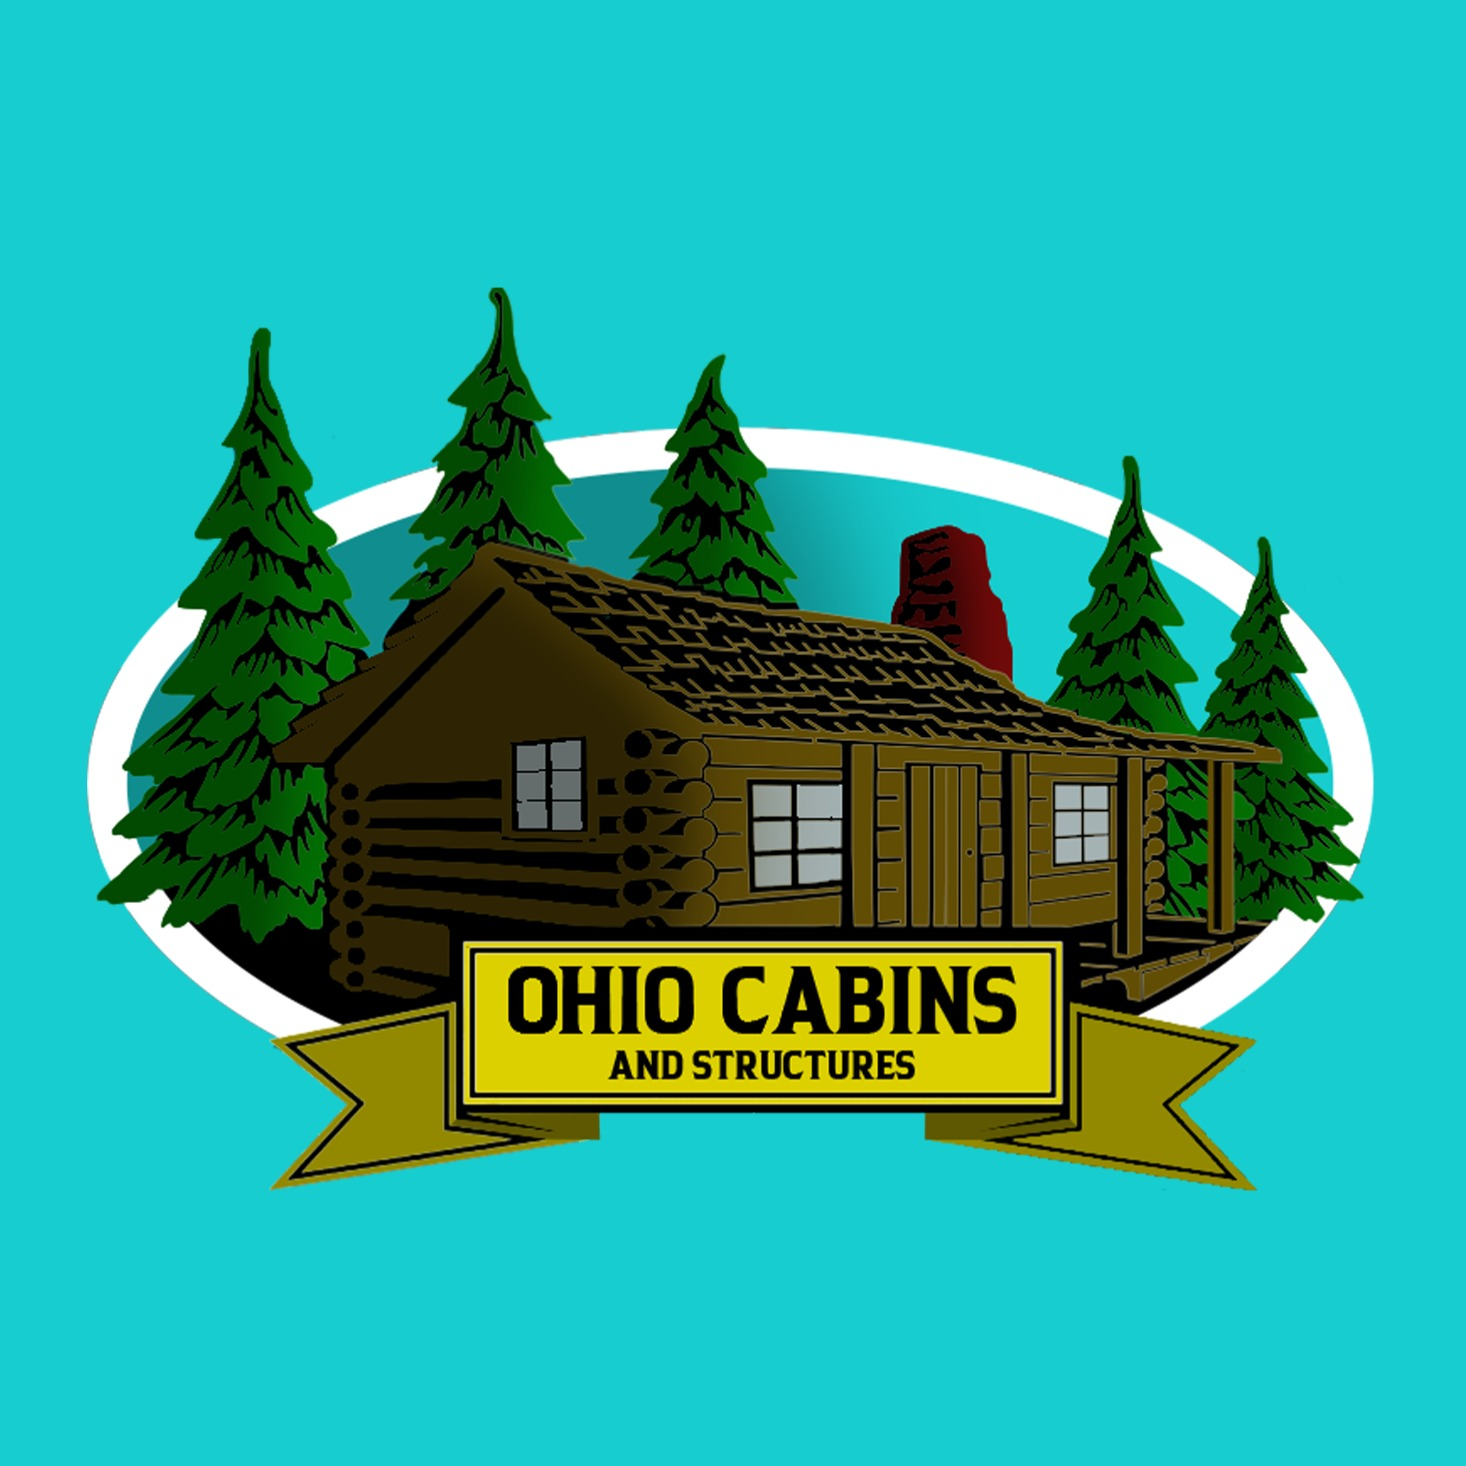 Ohio Cabins and Structures